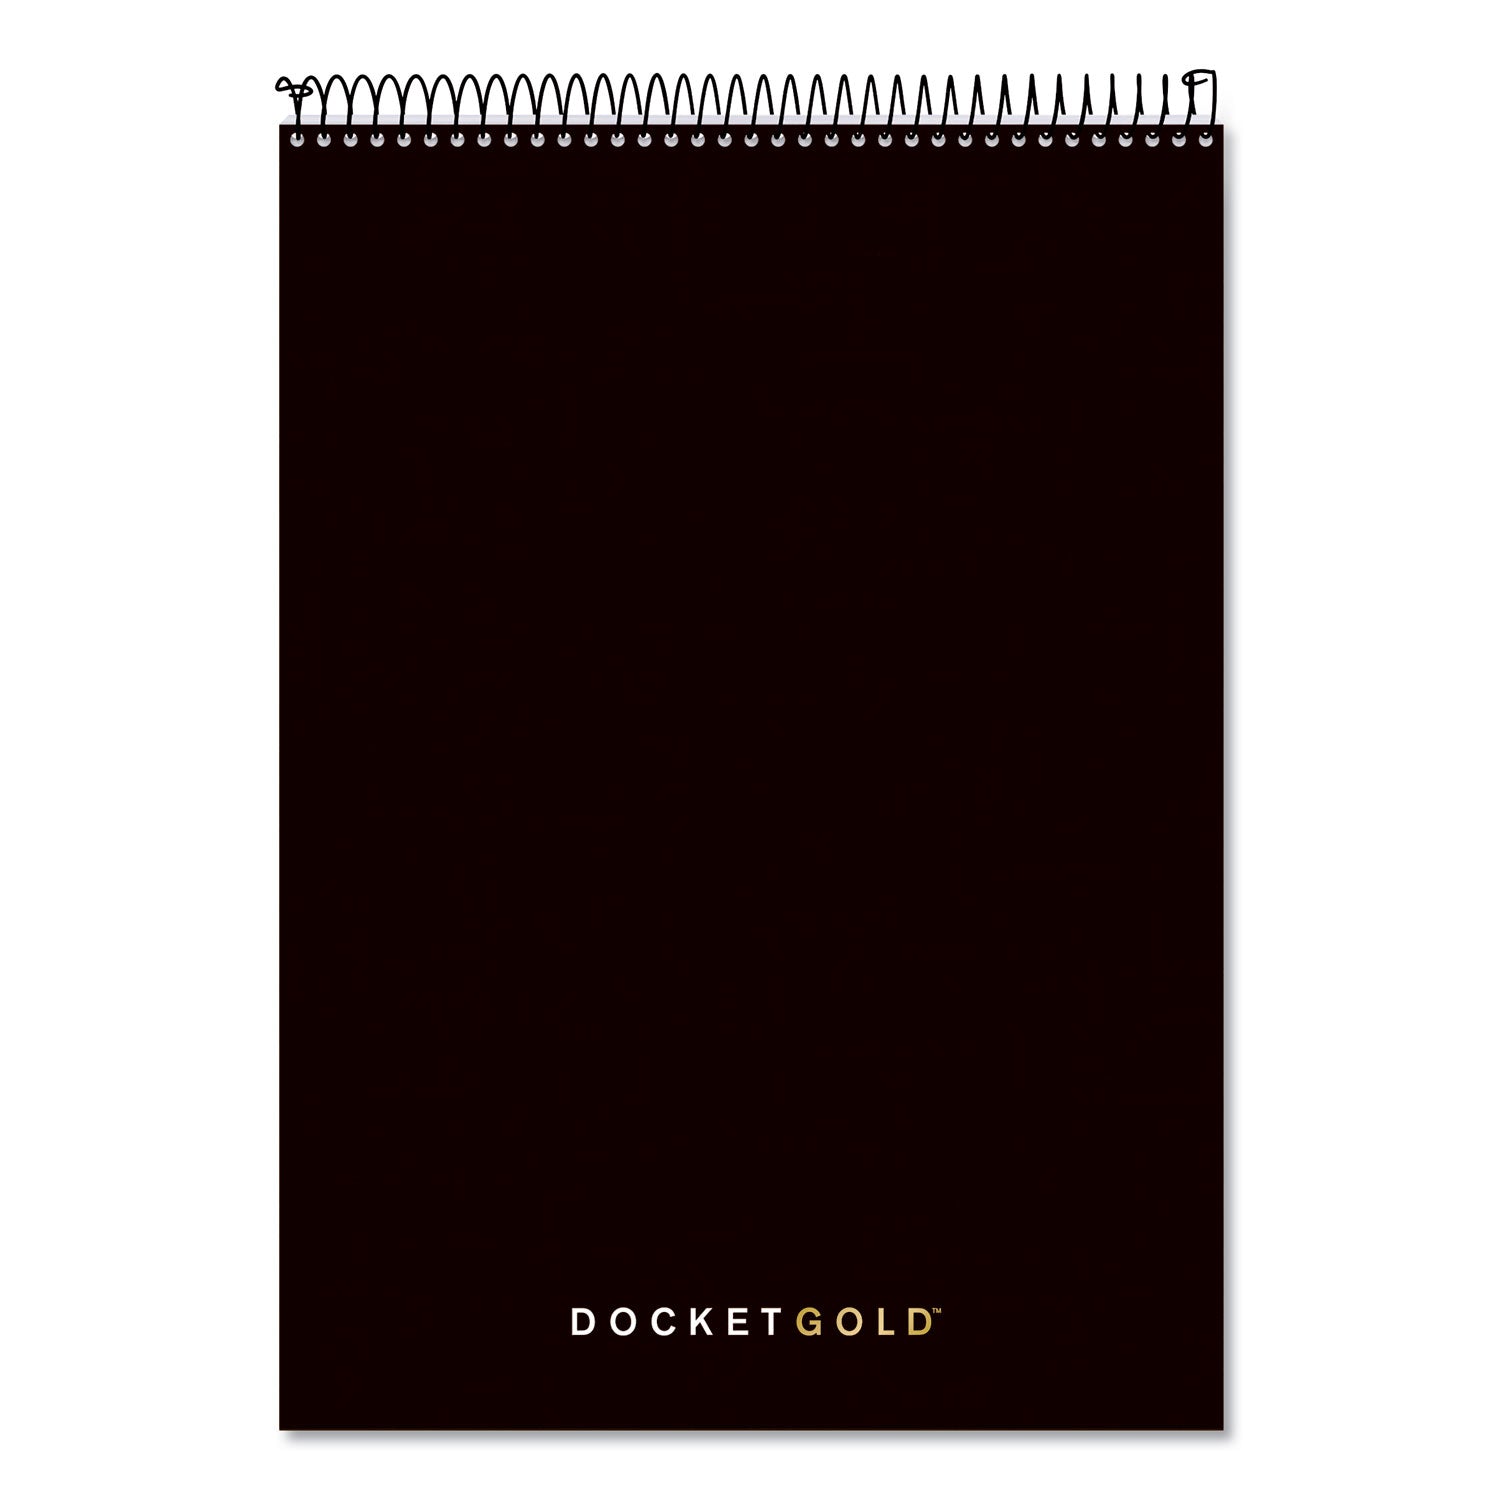 Docket Gold Planner Pad, Project-Management Format, Medium/College Rule, Black Cover, 70 White 8.5 x 11.75 Sheets - 